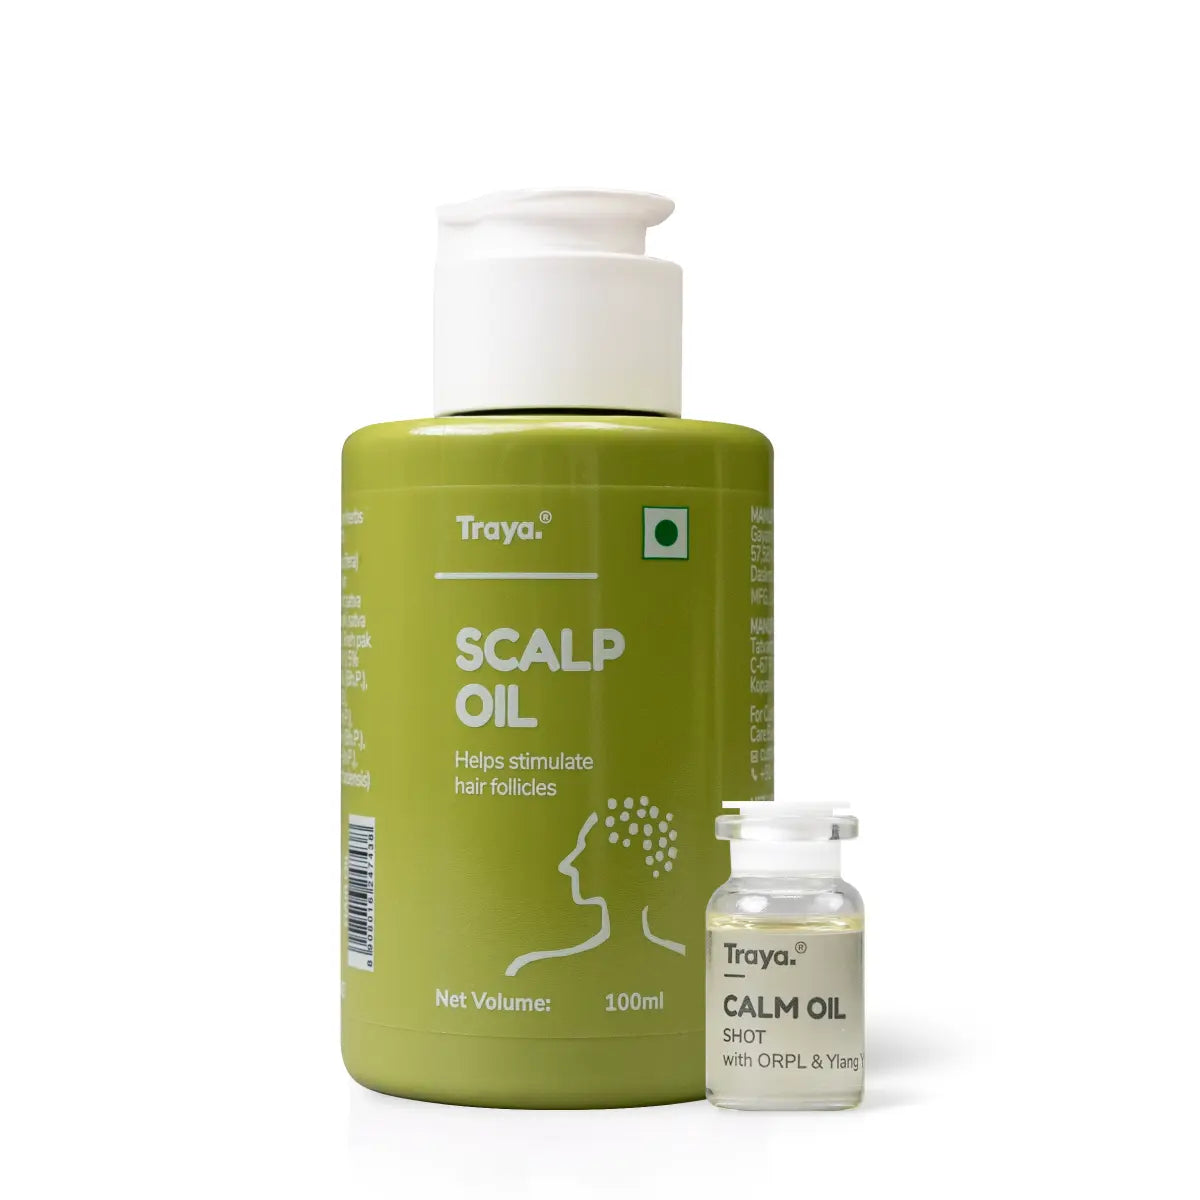 Scalp Oil 100ml with Calm Oil Shot  | Contains ORPL and Ylang Ylang